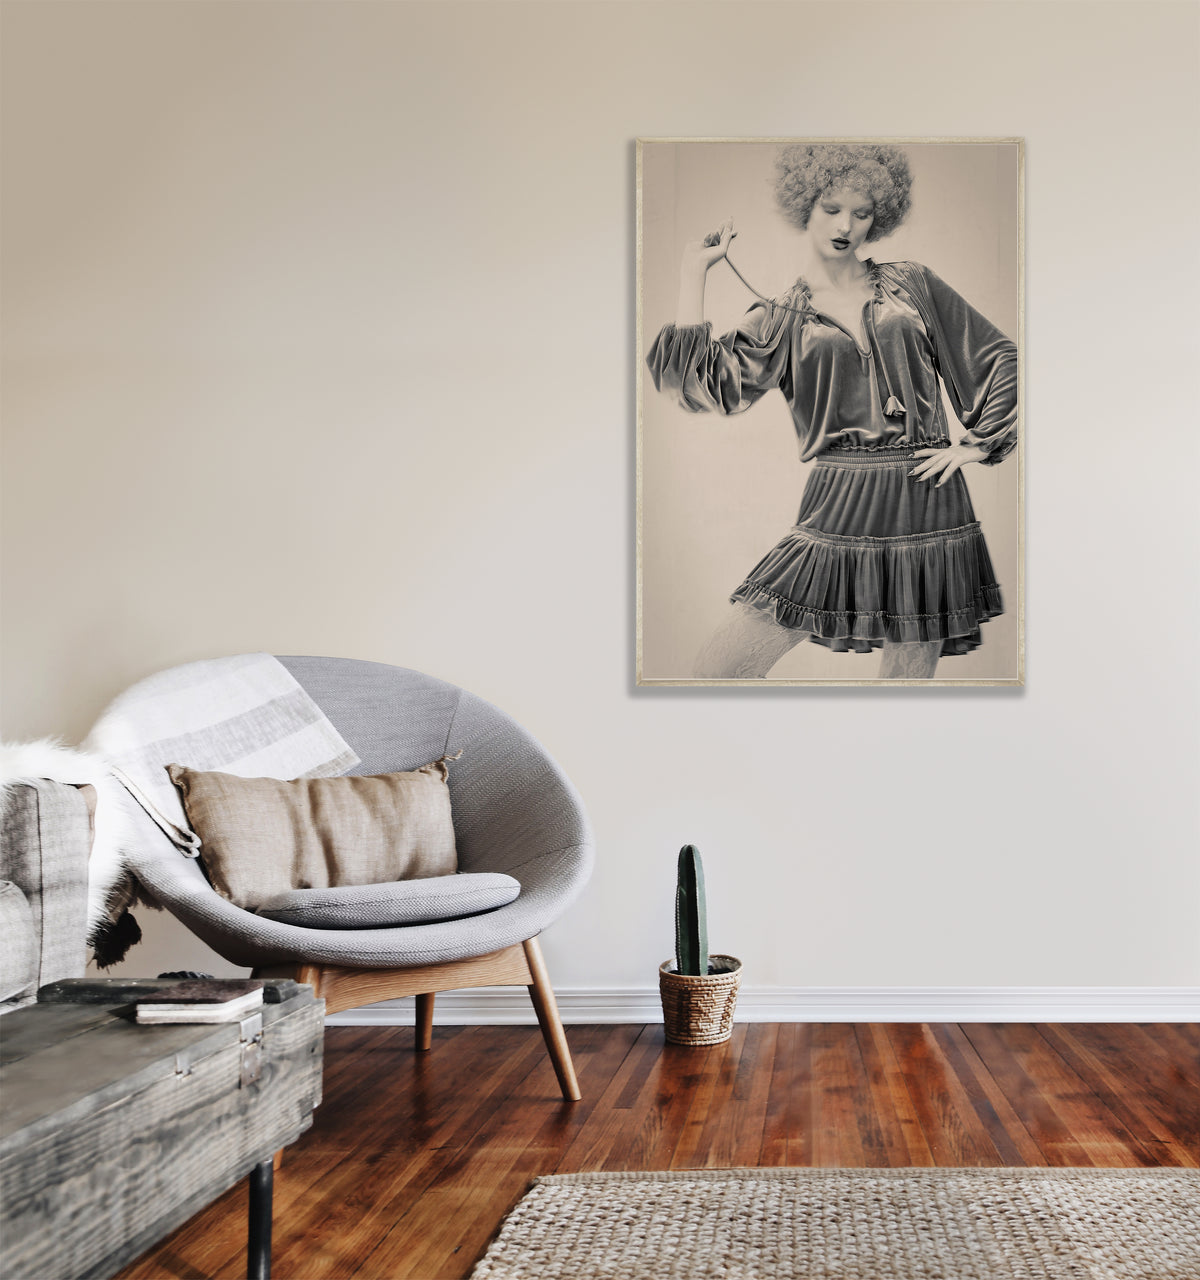 living room setting for Fine art  framed poster of a young woman in a heavy fabric dress and curly wig with an antique colour tone and feel